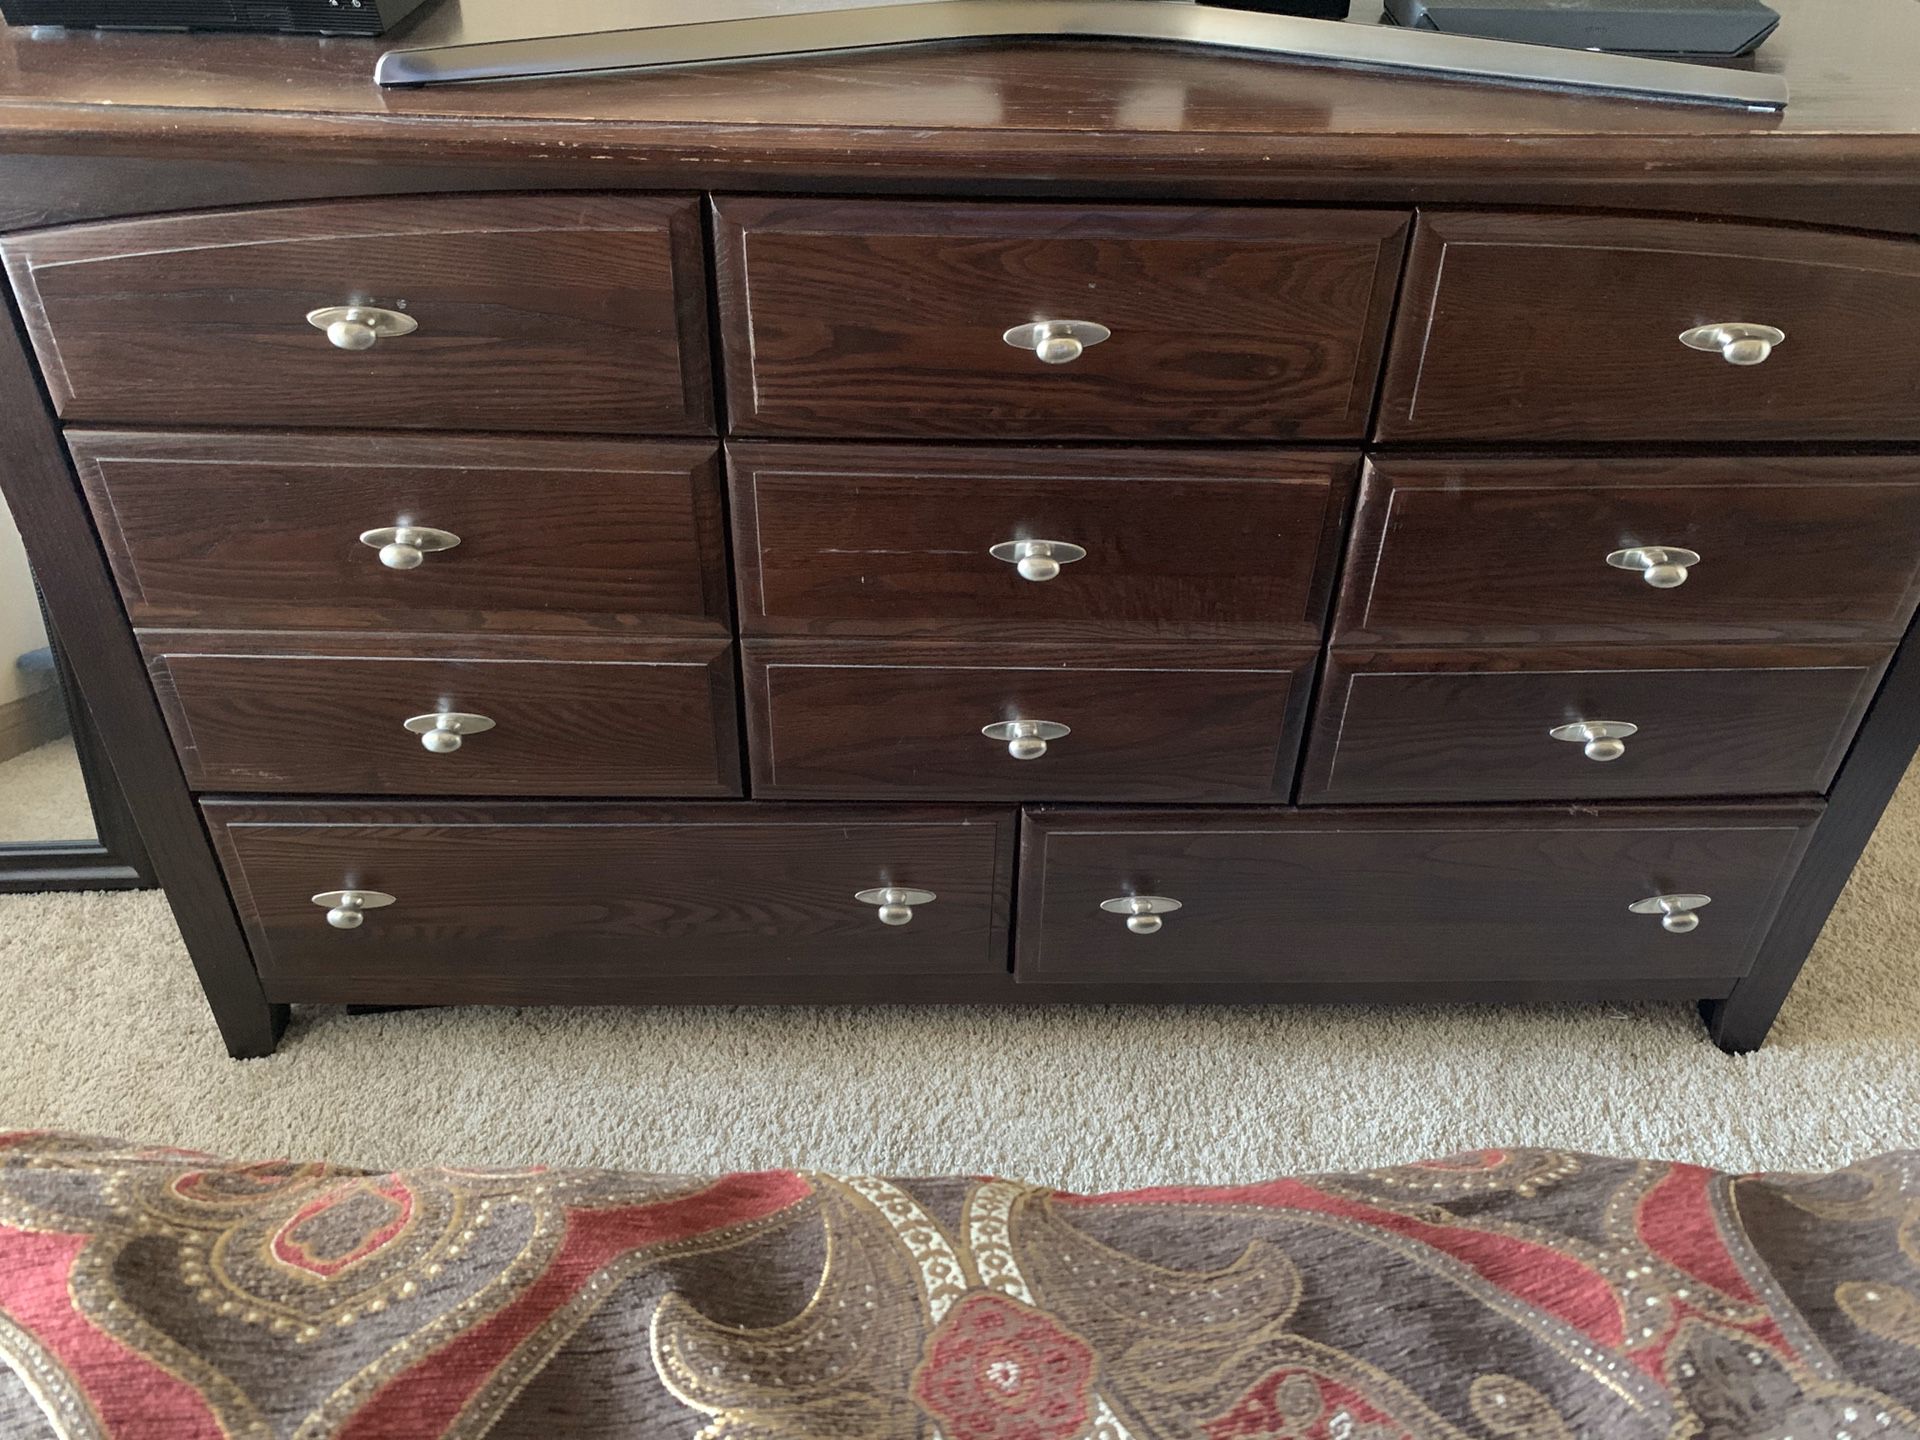 Dresser.... 11 drawers!! - Must go by Jan 2! Make an offer I can’t refuse!